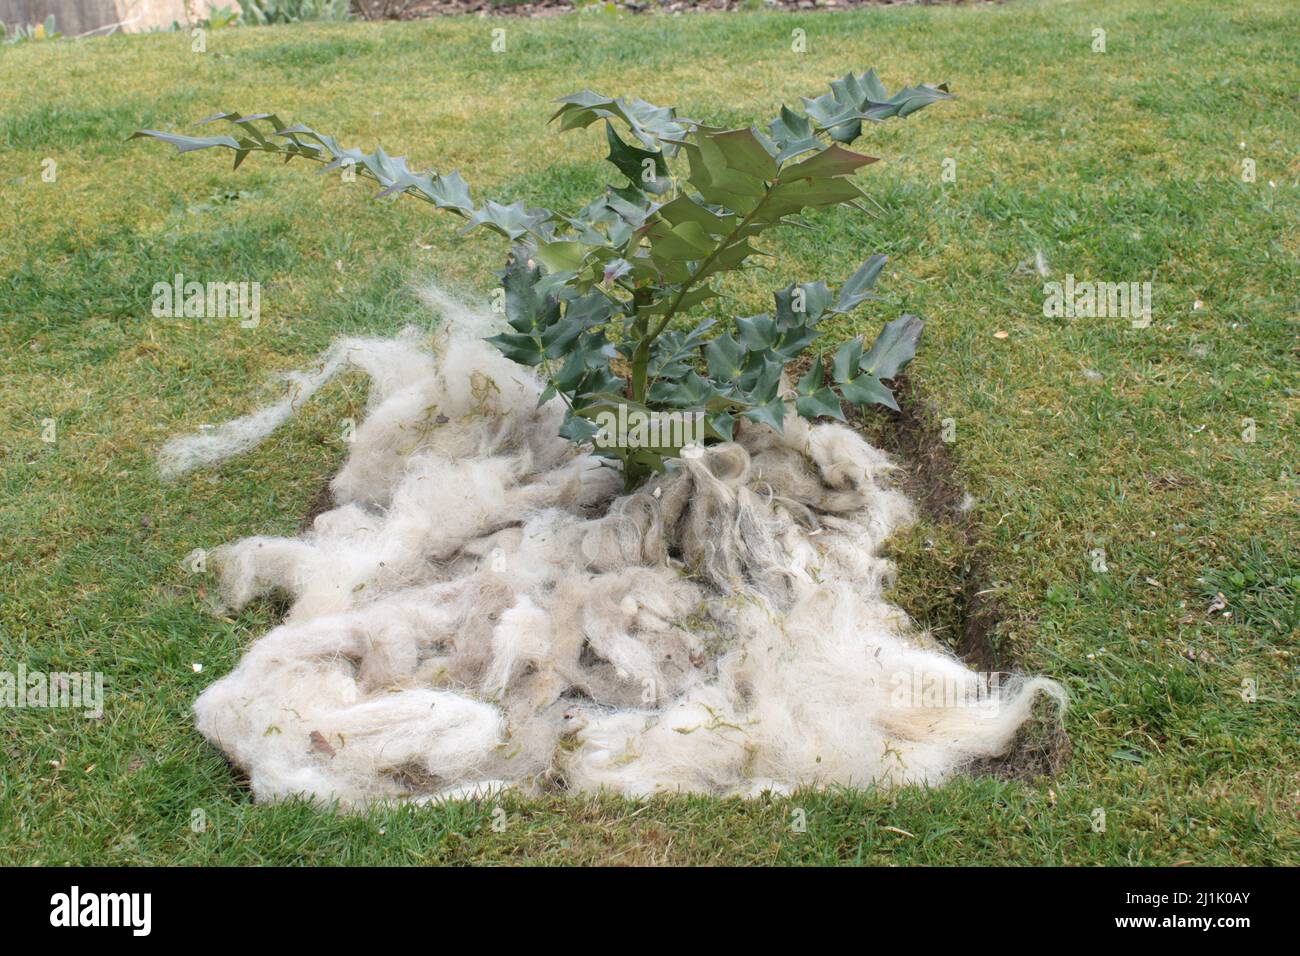 Sheep wool used as a natural mulch around a plant Stock Photo